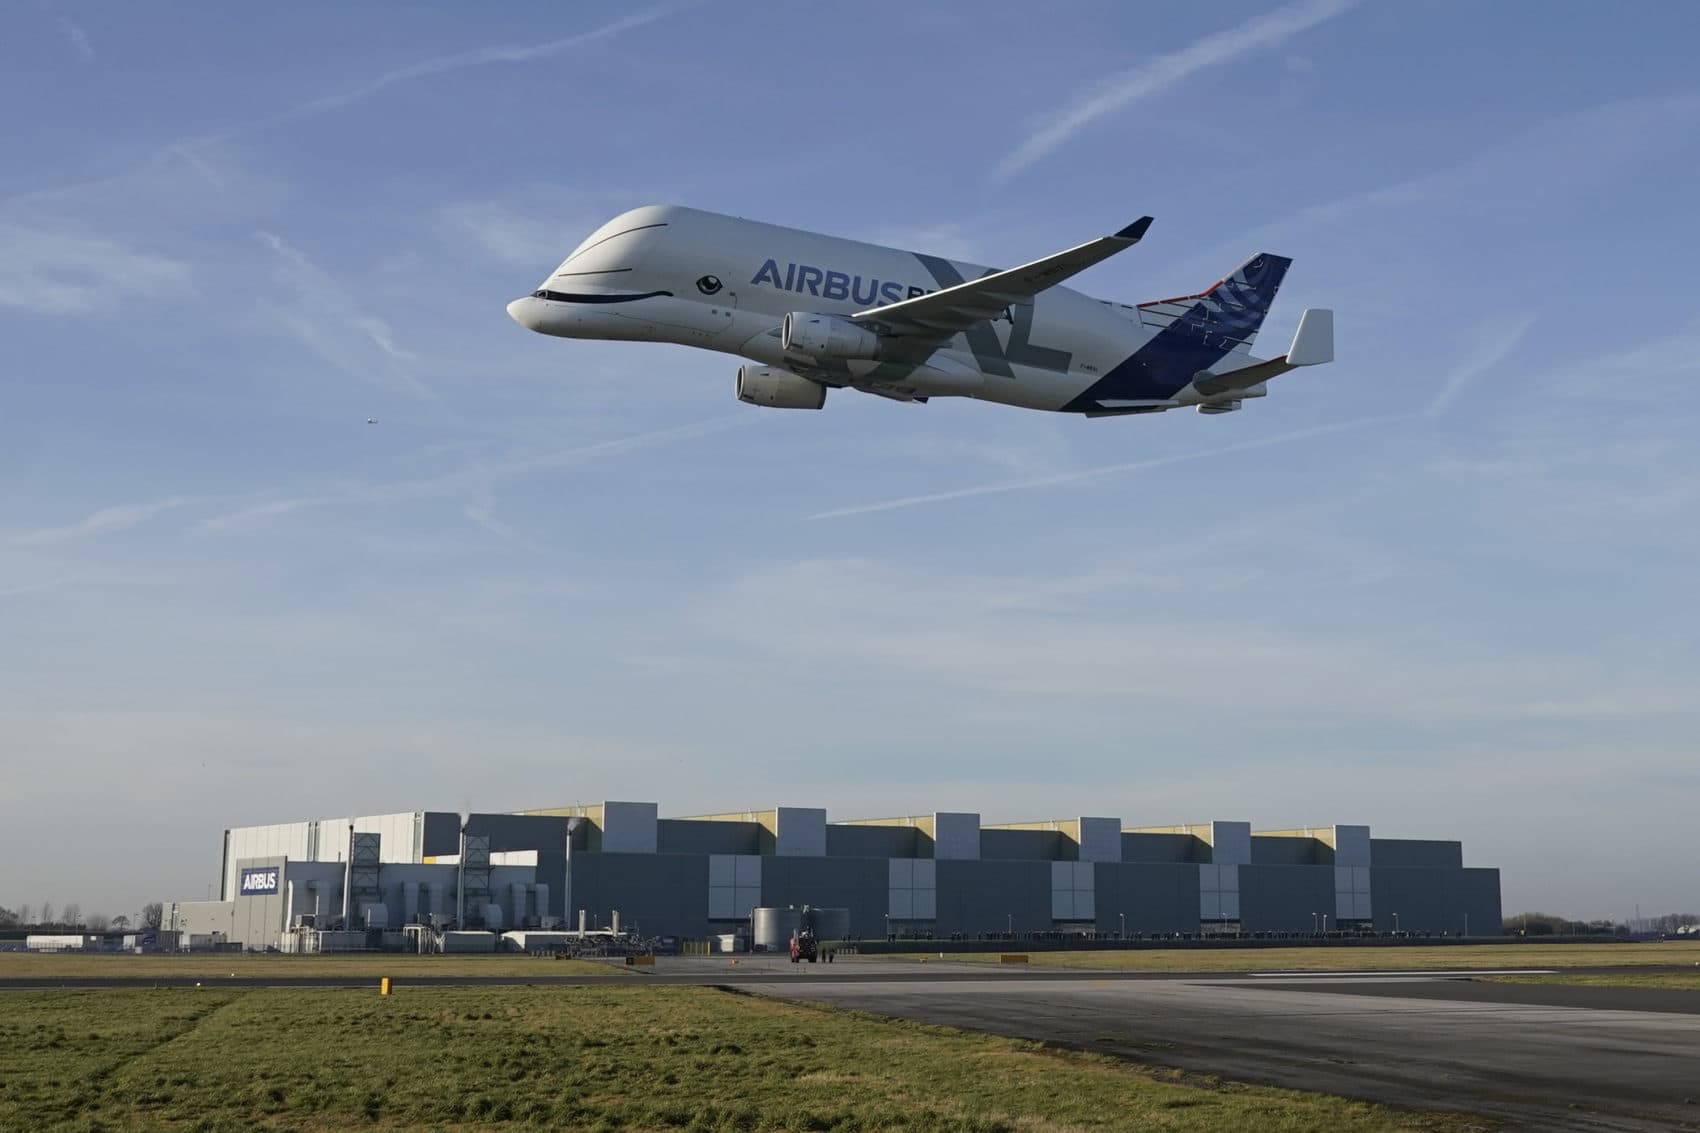 Airbus Will End Production Of The World's Largest Passenger Plane